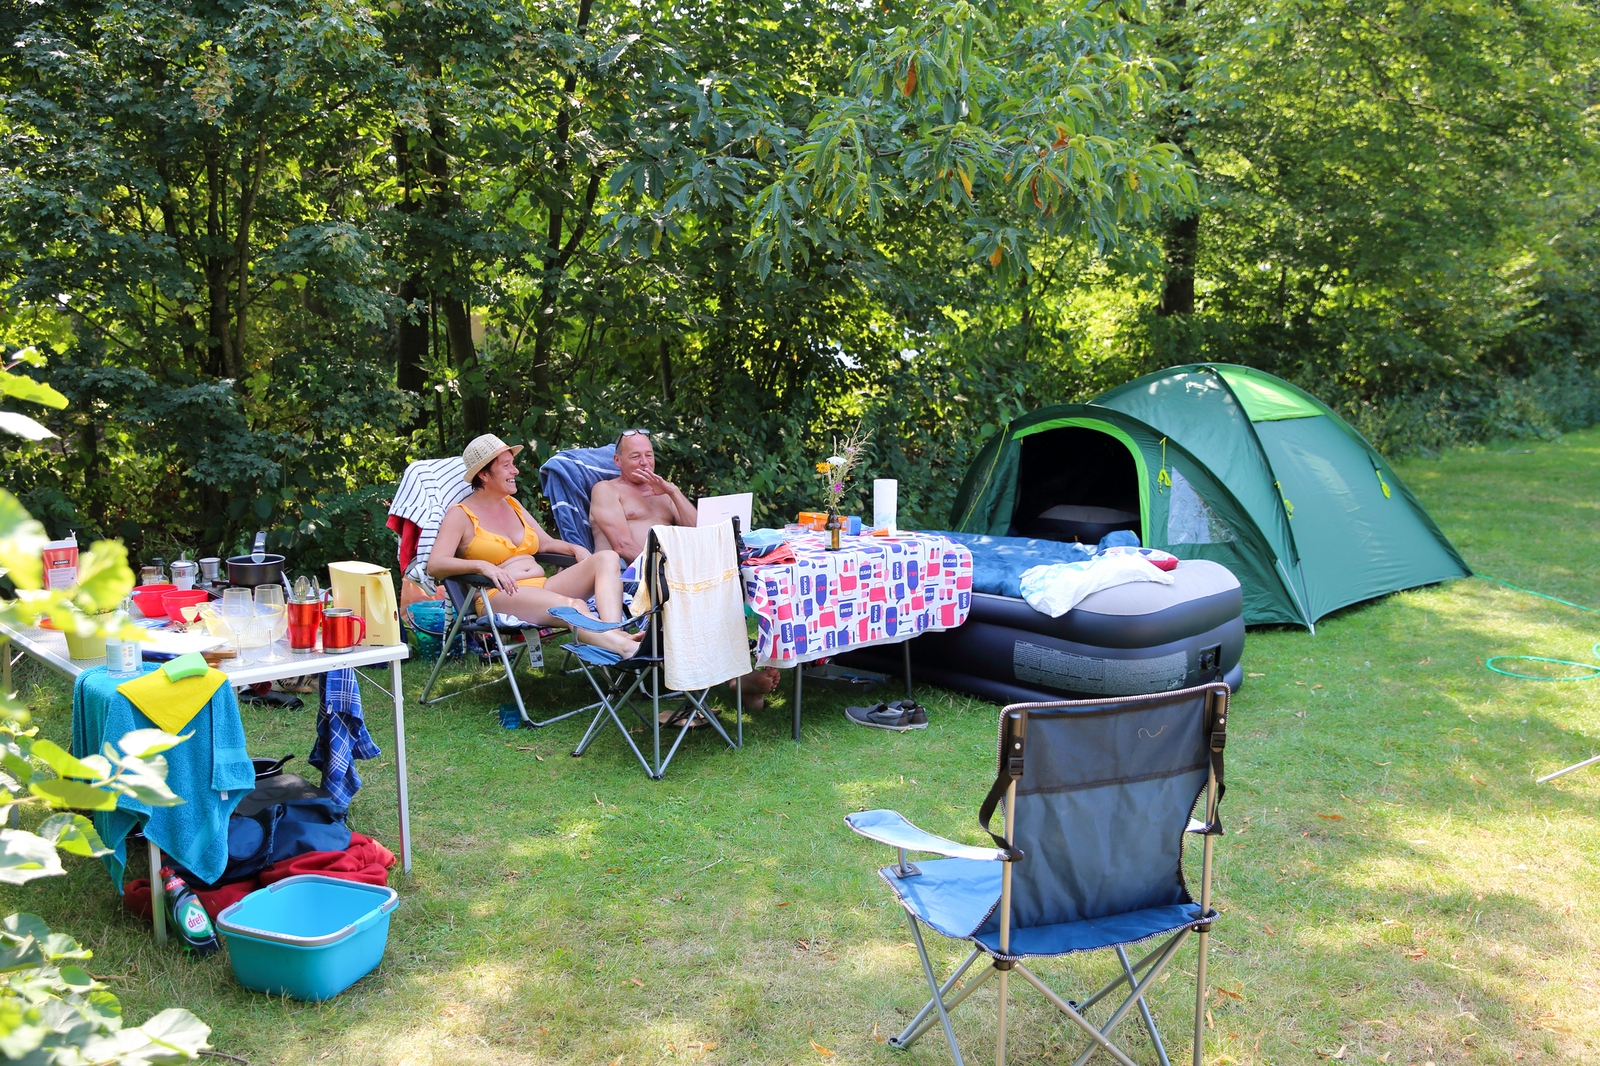 Camping pitch incl. 2 persons, excl. electricity